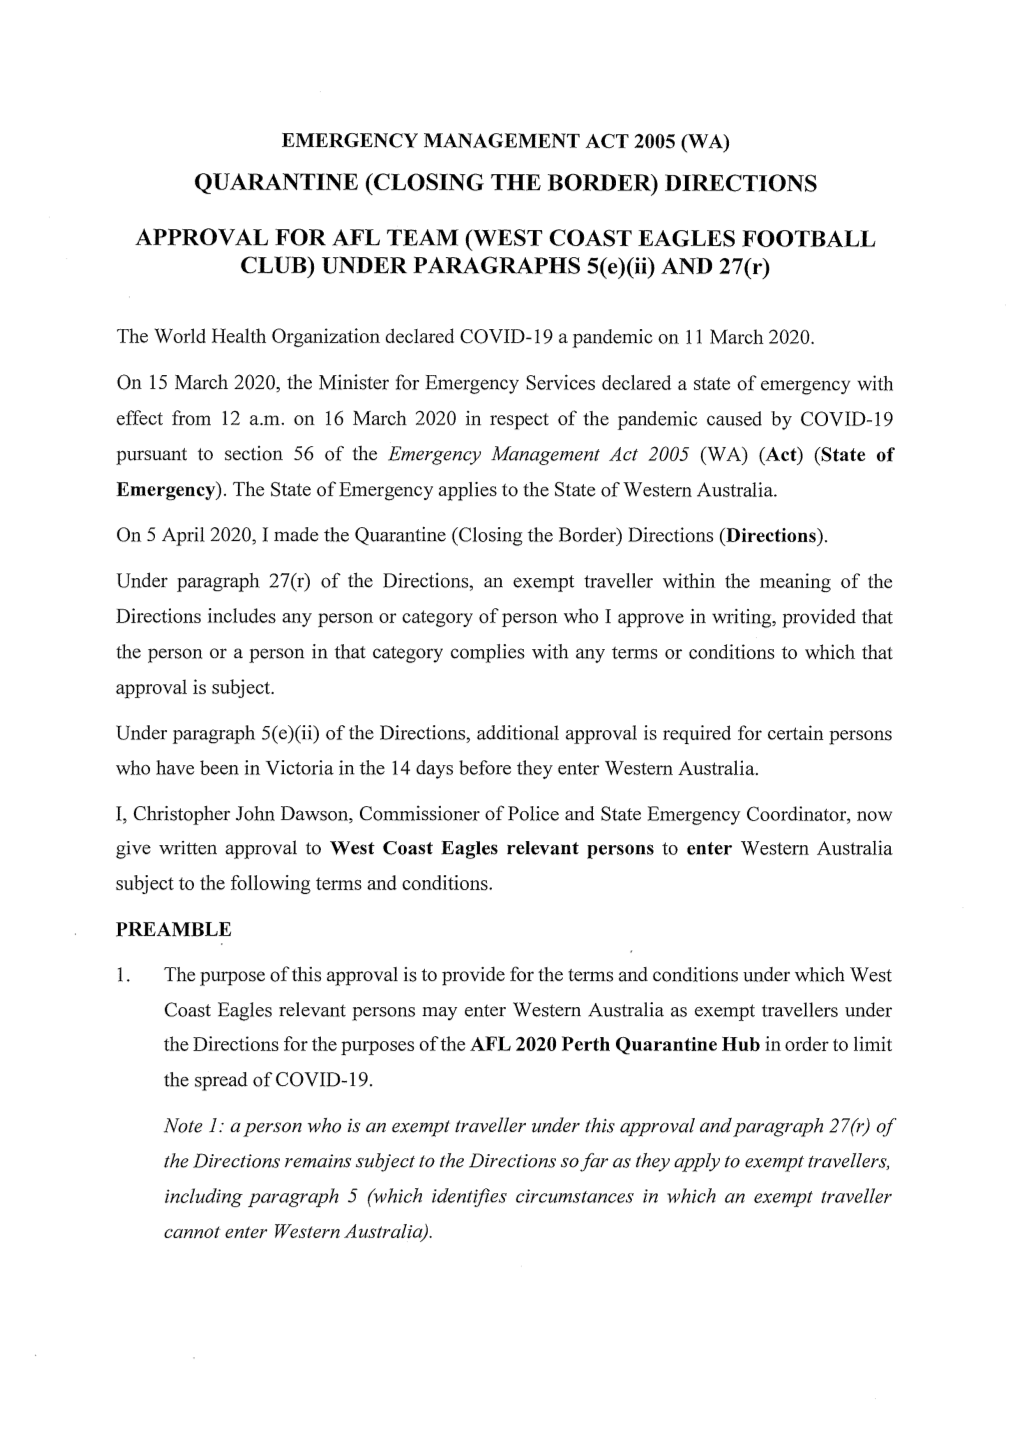 DIRECTIONS APPROVAL for AFL TEAM (WEST COAST EAGLES FOOTBALL CLUB) UNDER PARAGRAPHS S(E)